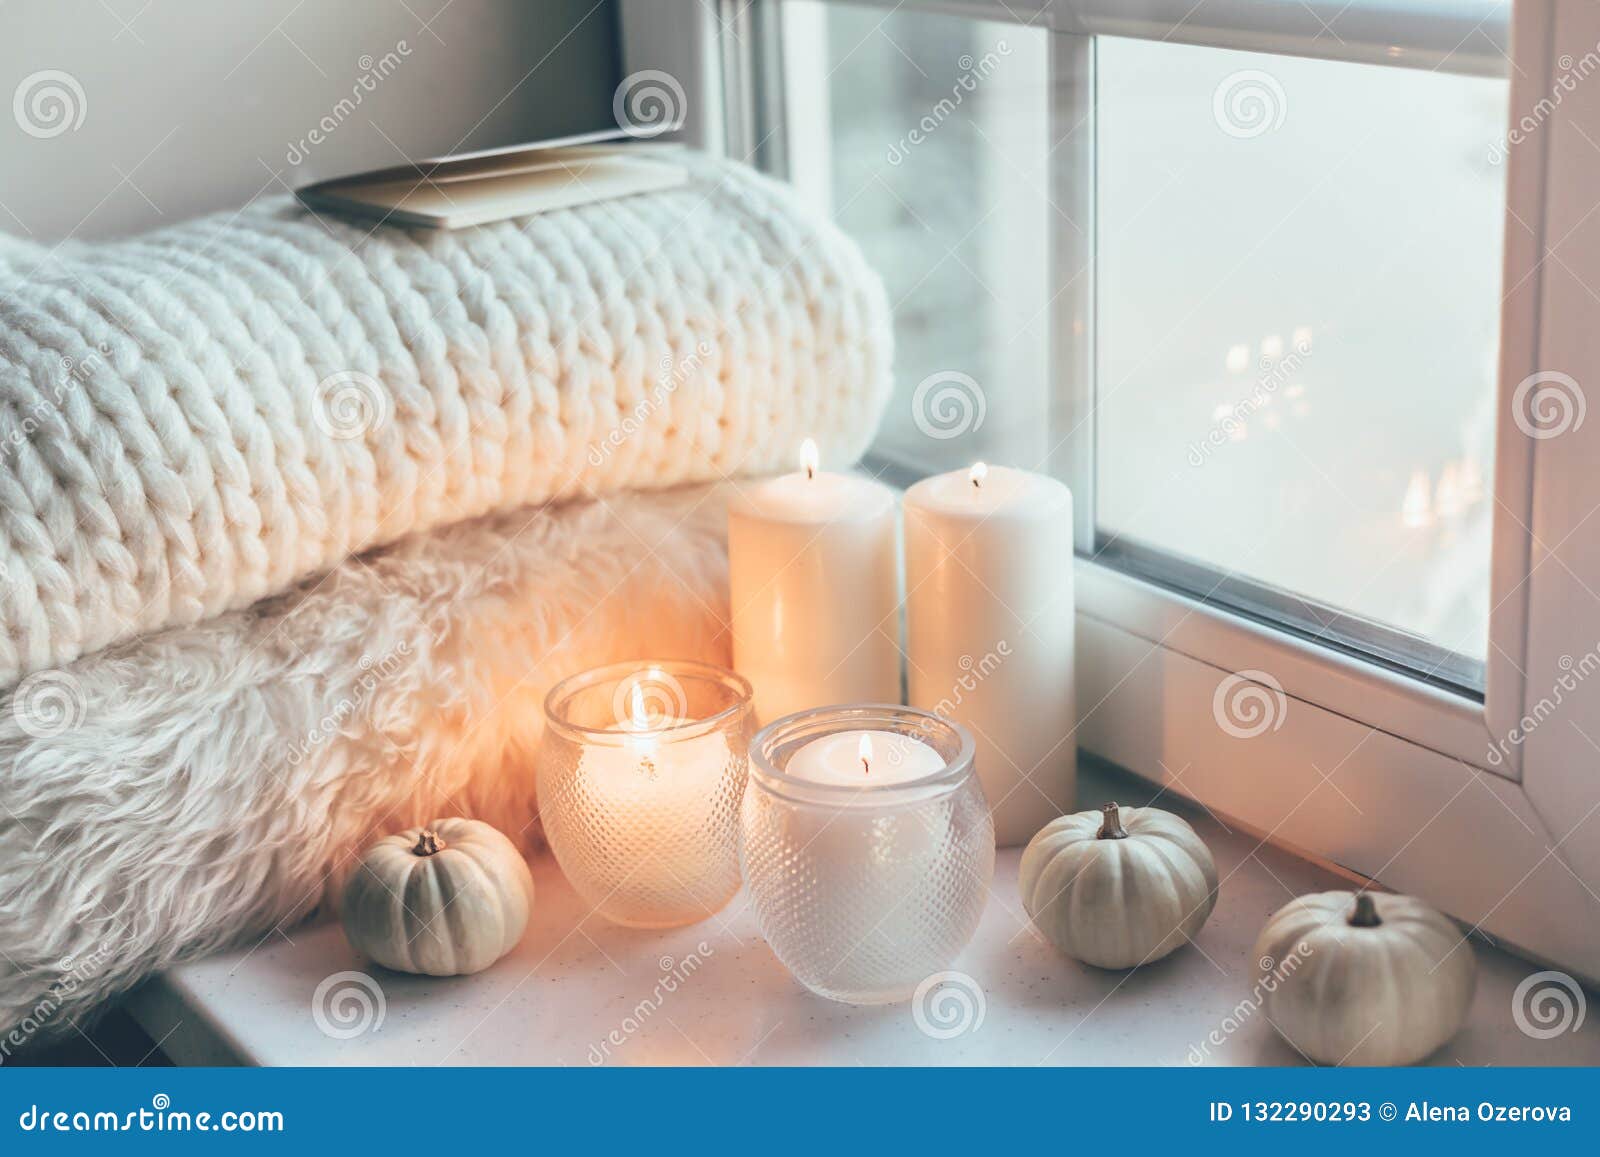 hygge scene with sweater and candles